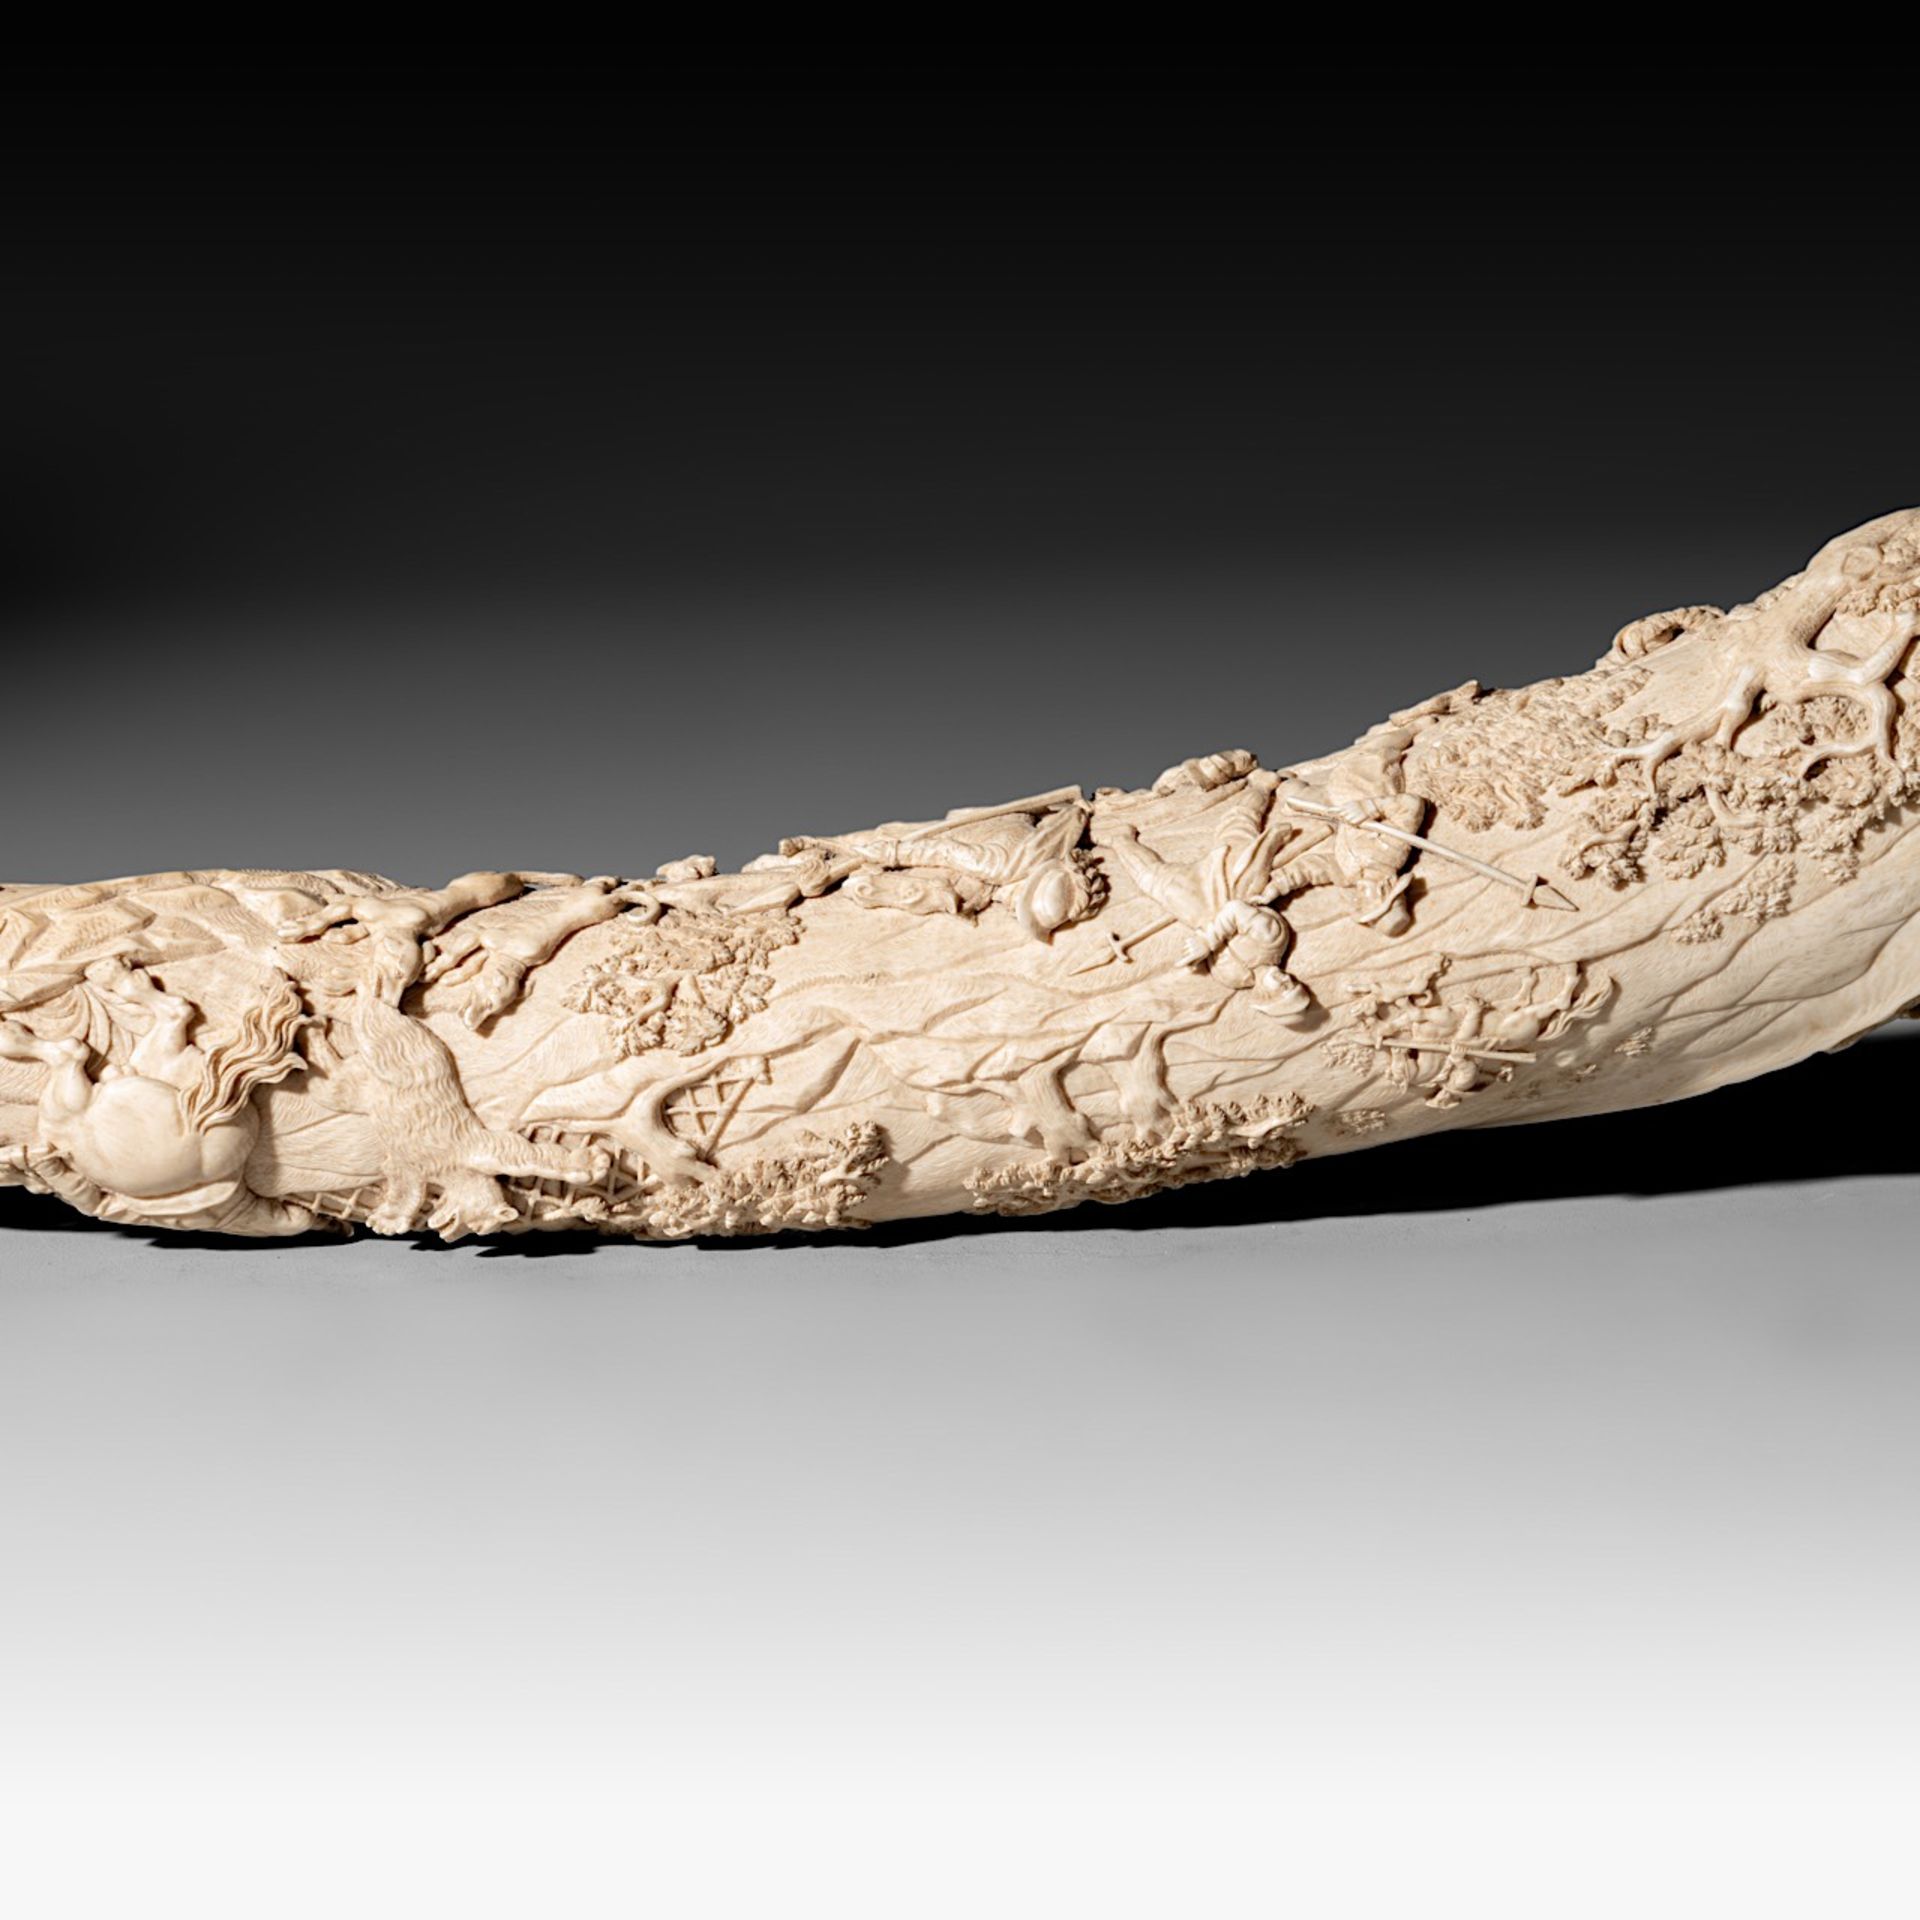 A 19th-century ivory hunting horn, last quarter 19th century, W 74,5 cm - 2850 g (+) - Image 9 of 11